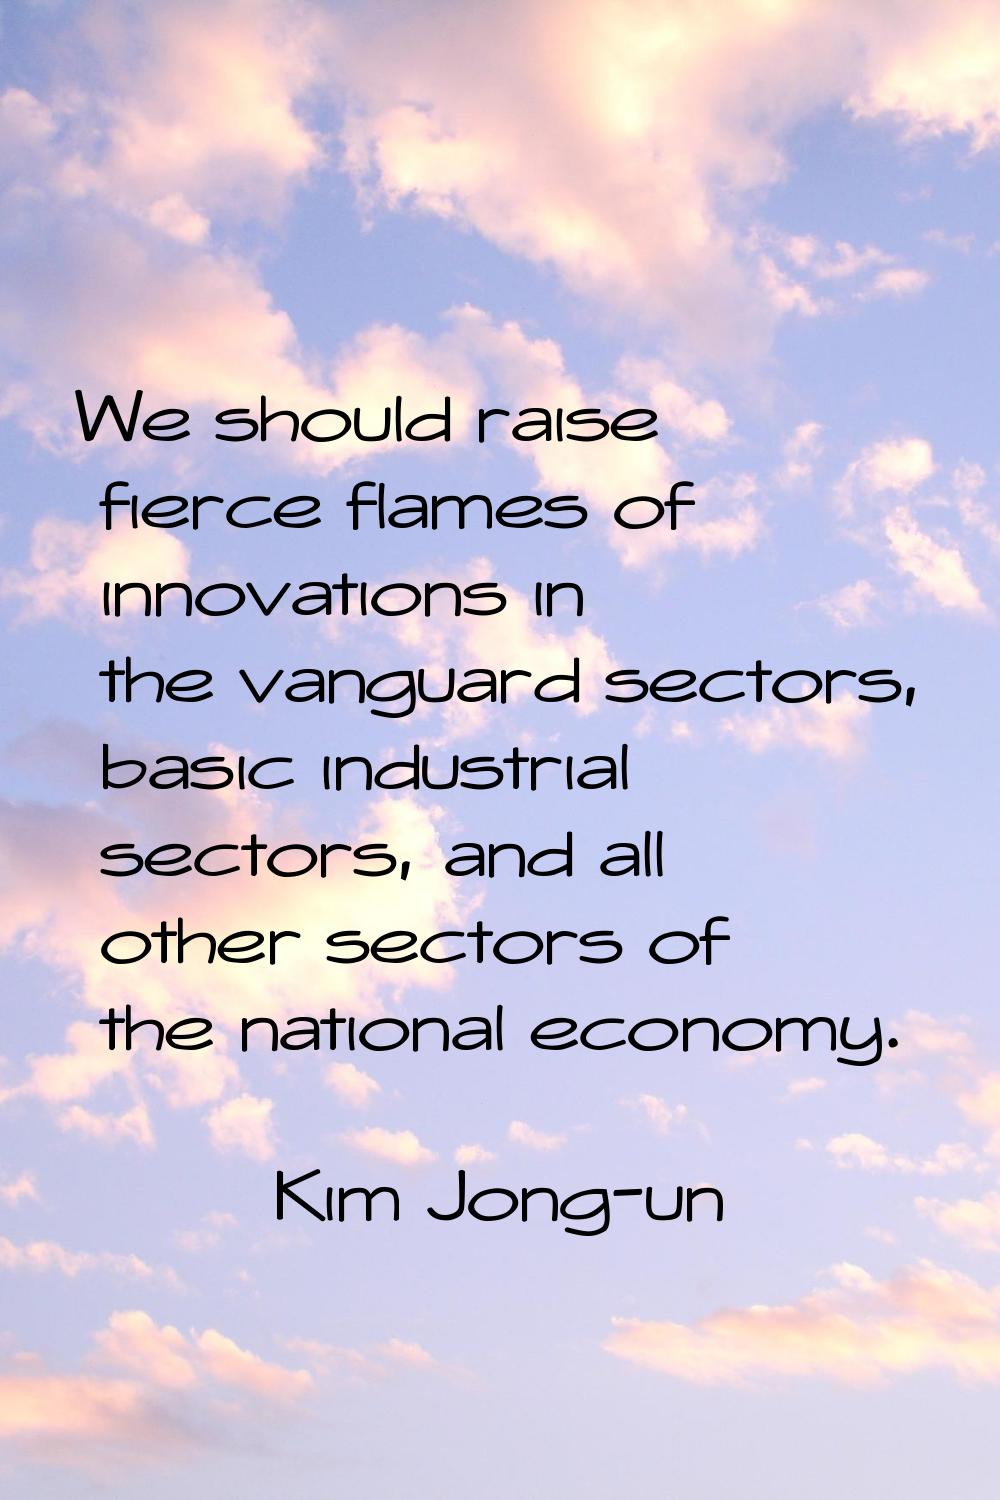 We should raise fierce flames of innovations in the vanguard sectors, basic industrial sectors, and